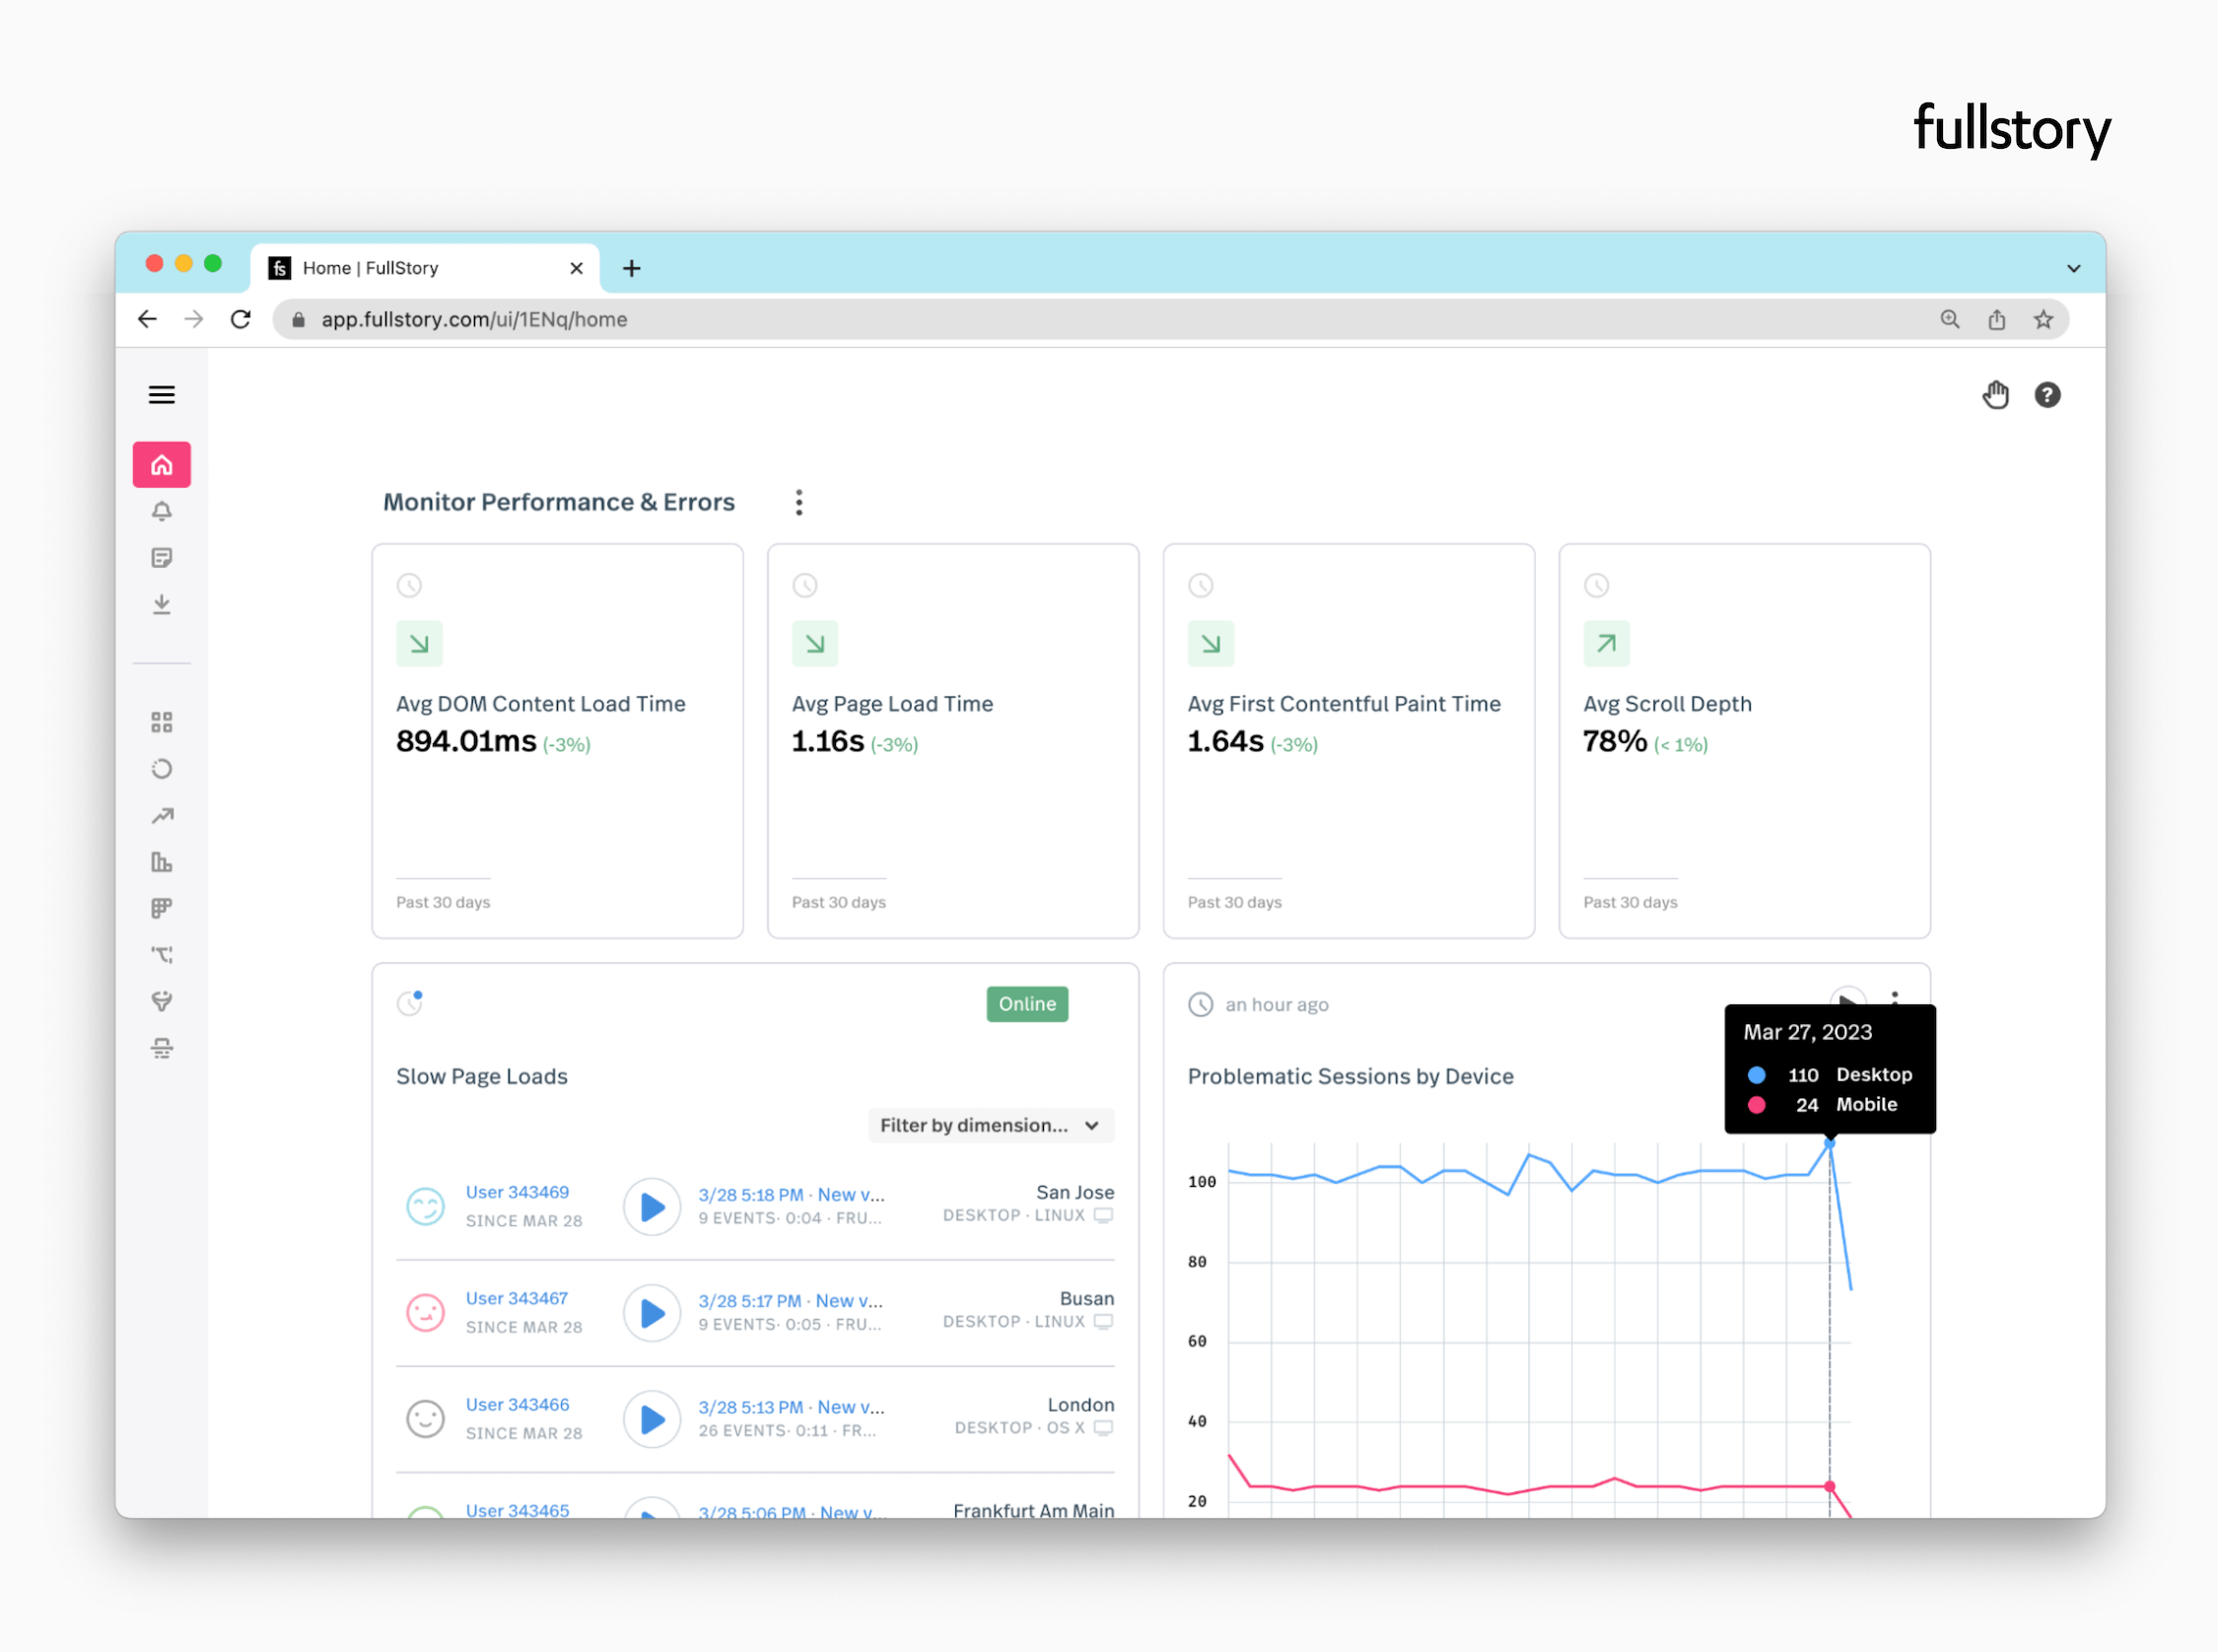 A dashboard in the FullStory app showing average DOM content load time (849.01ms), avg. page load time (1.16s), avg First Contentful paint time (1.64s), avg scroll depth (78%), and problematic sessions by device.